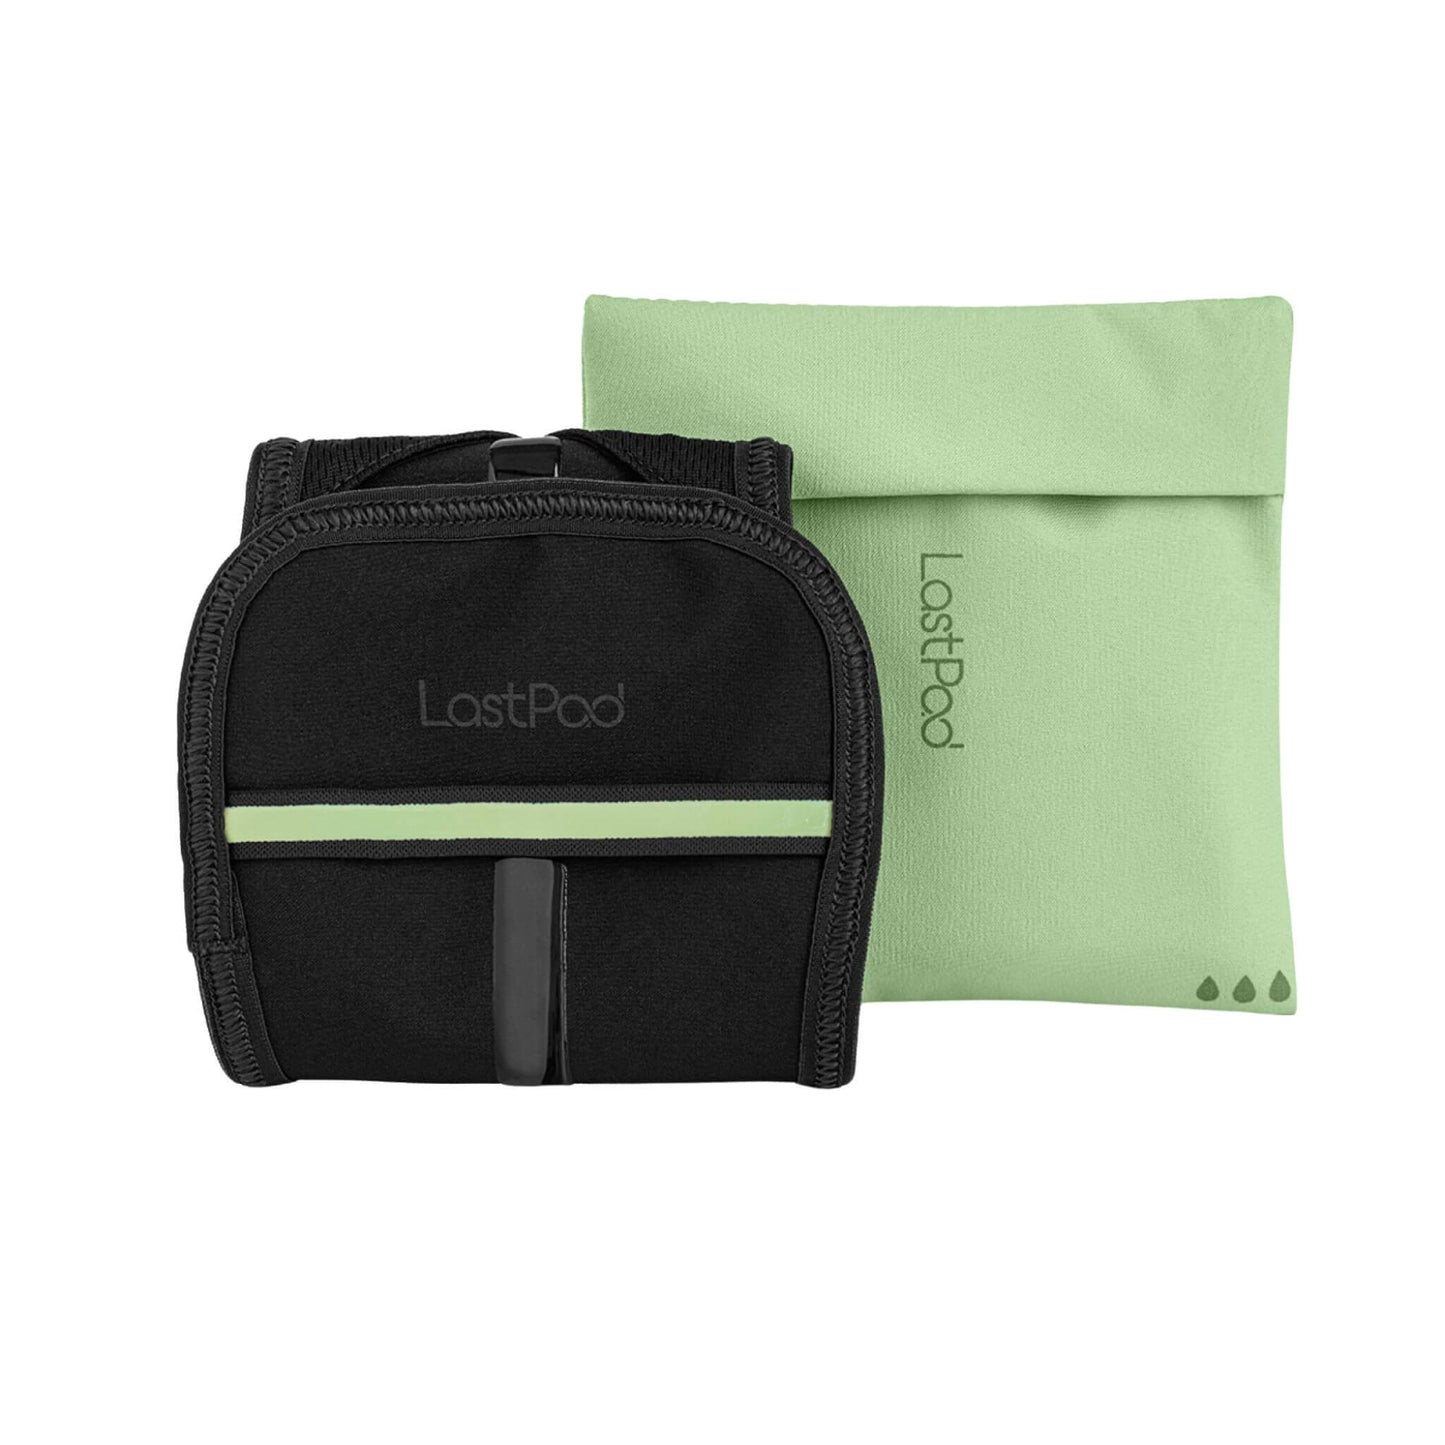 lastobject lastpad in green with cover next to it